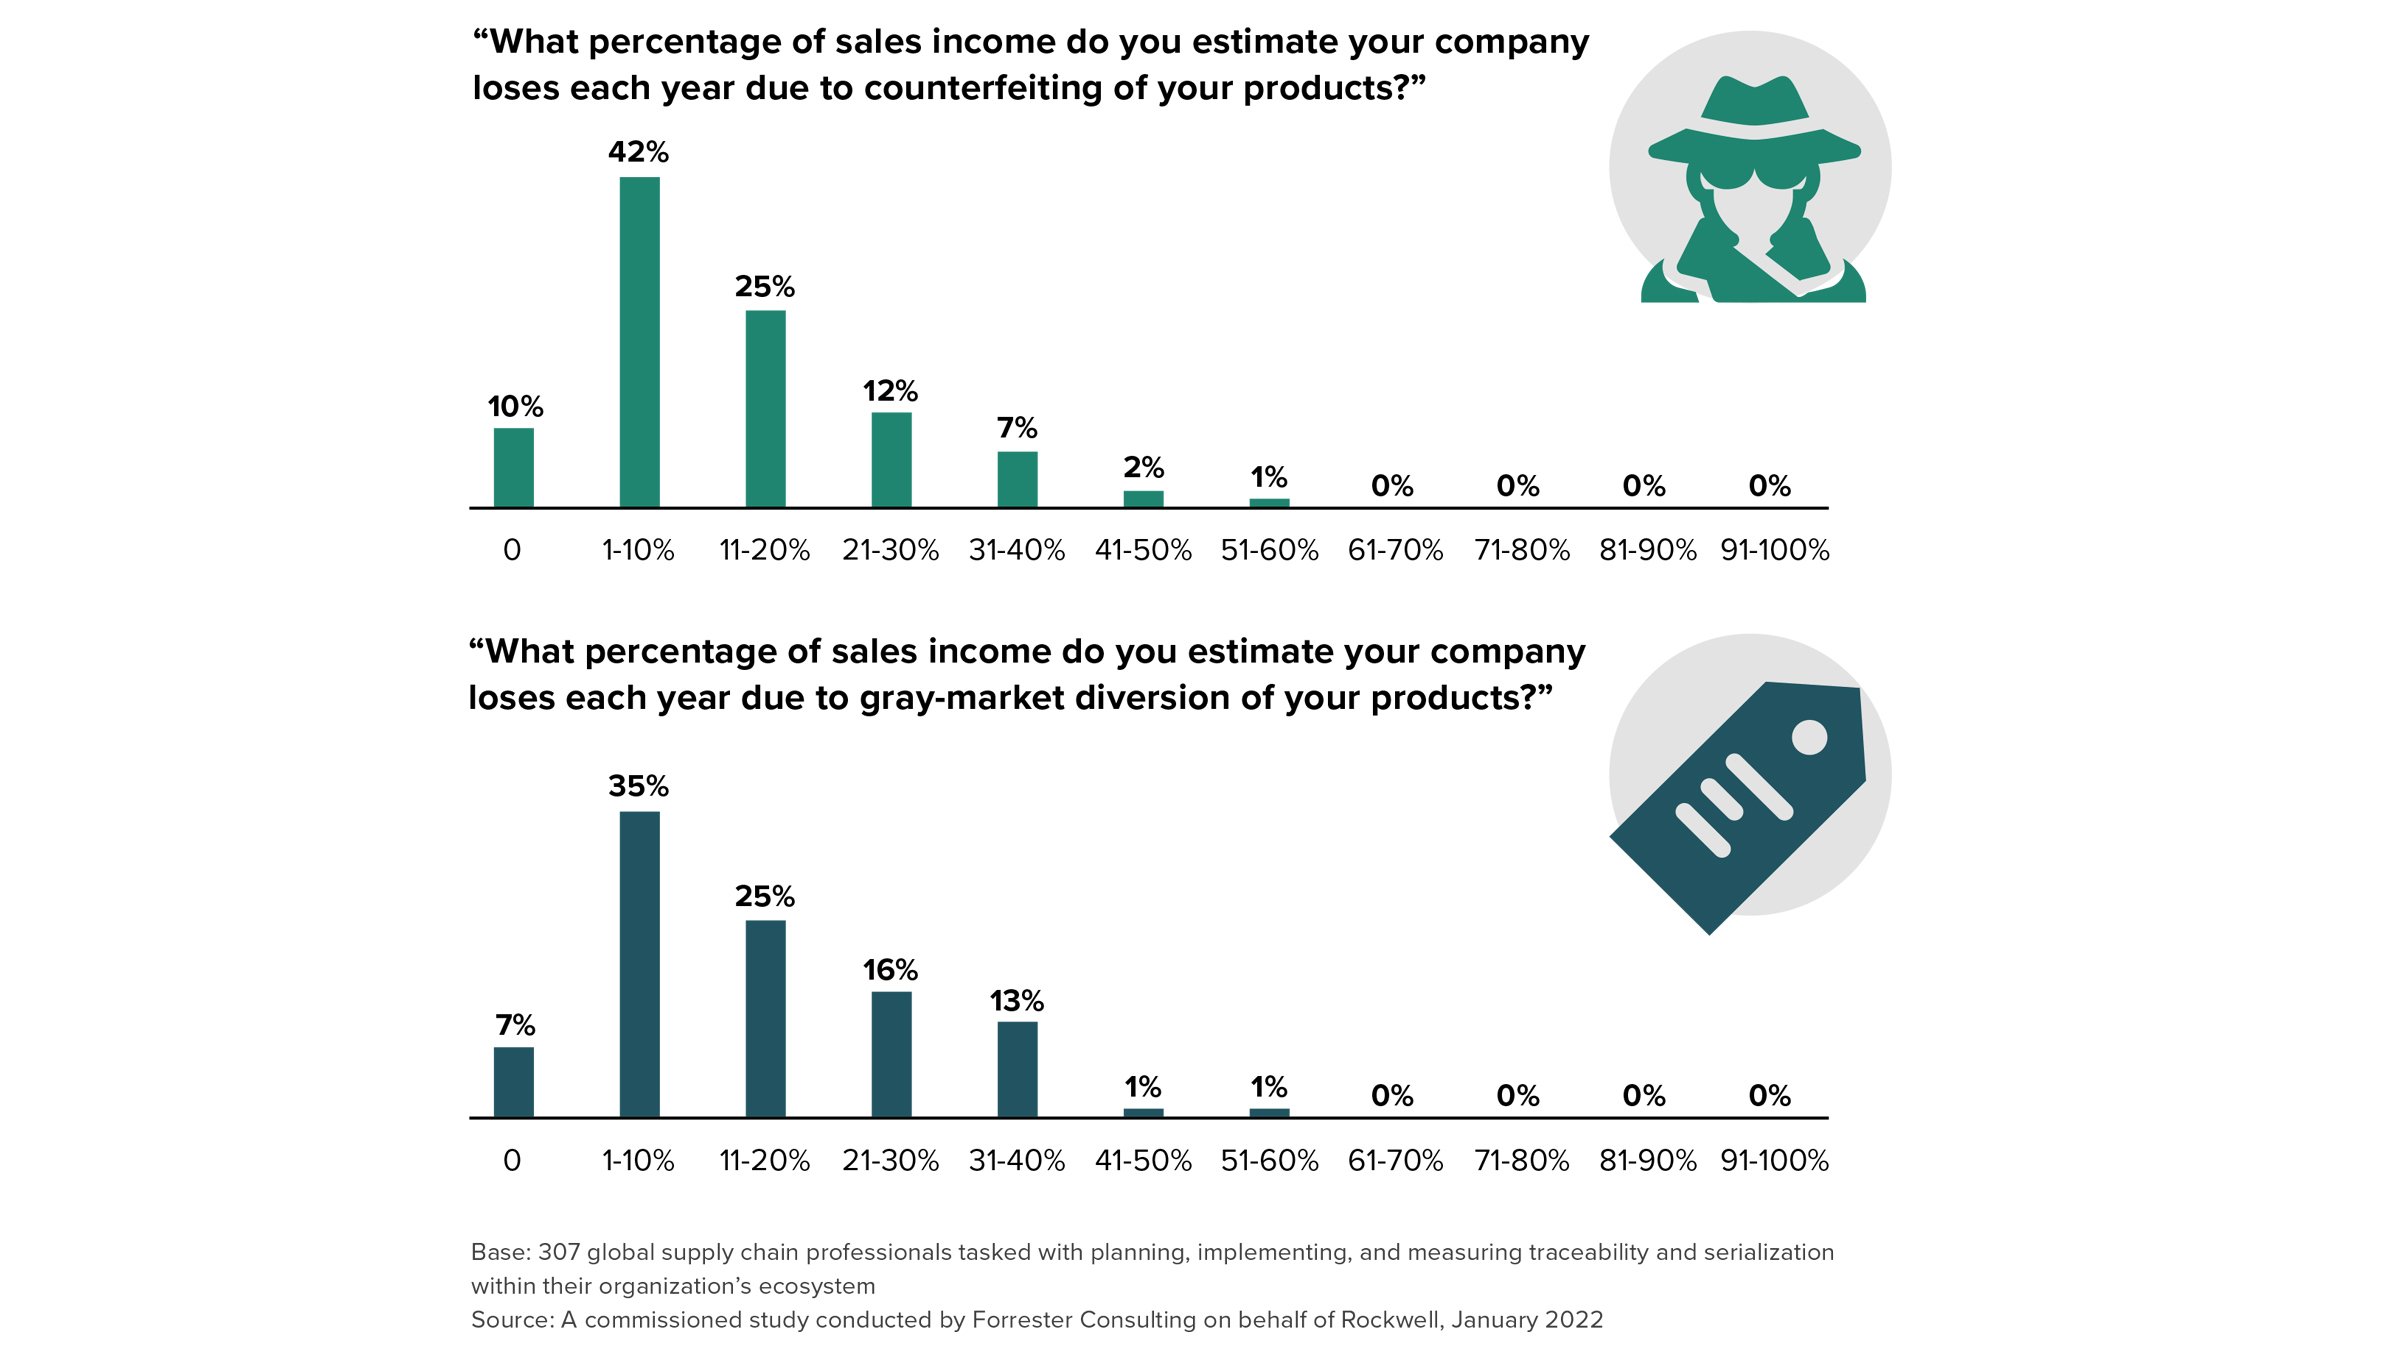 Infographic showing bar chart of responses to the survey question "What percentage of sales income do you estimate your company loses each year due to counterfeiting of your products?"